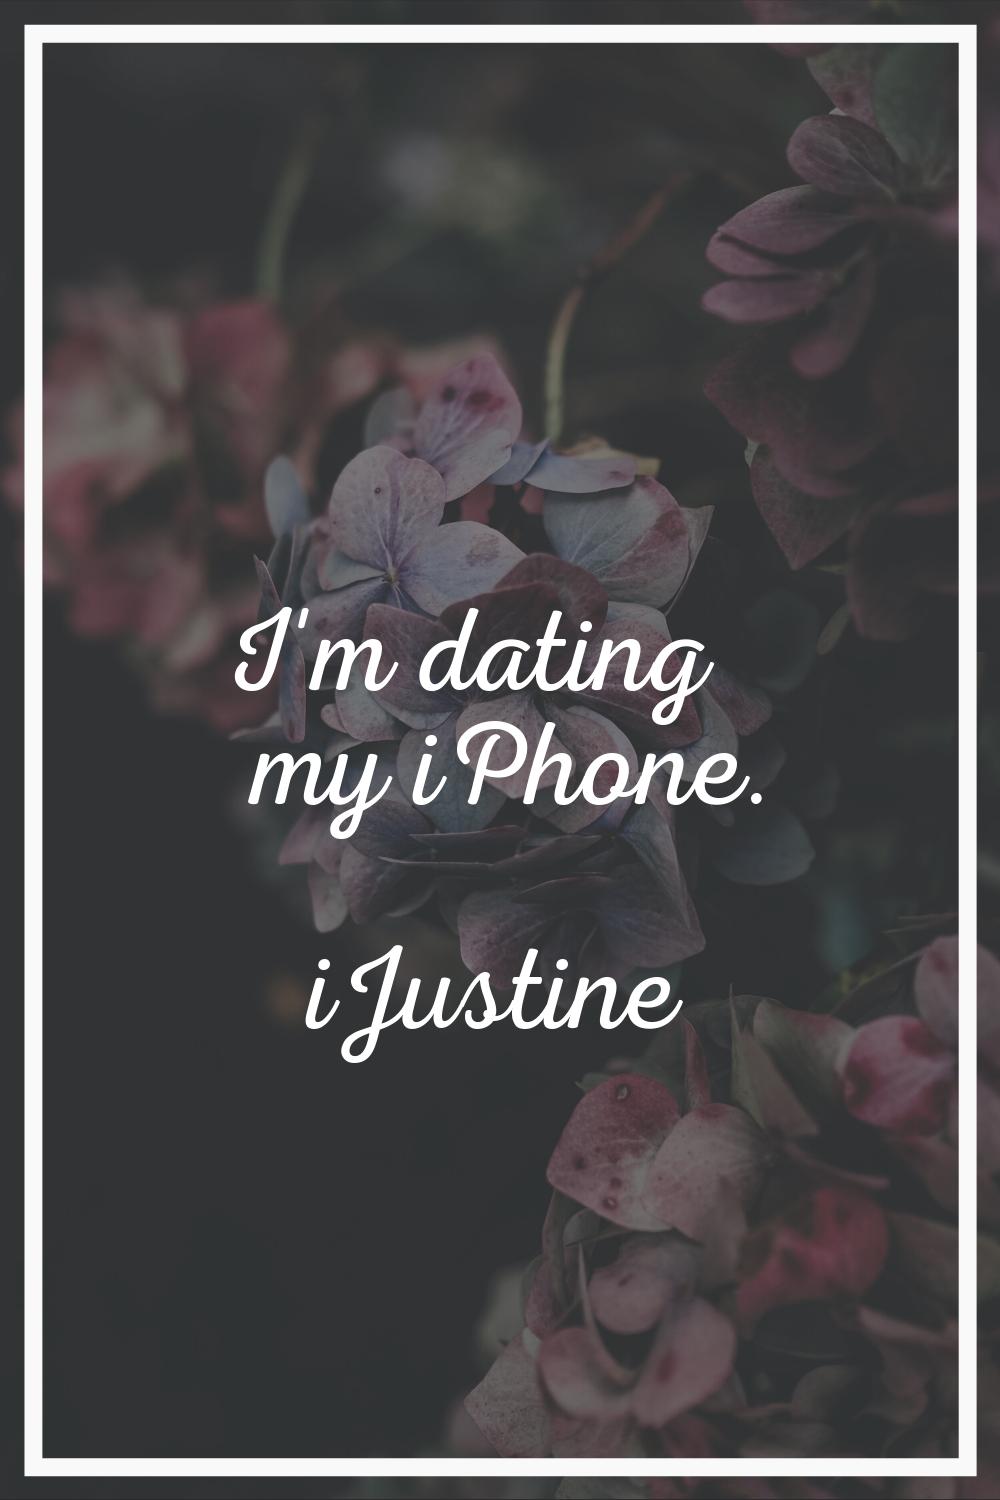 I'm dating my iPhone.